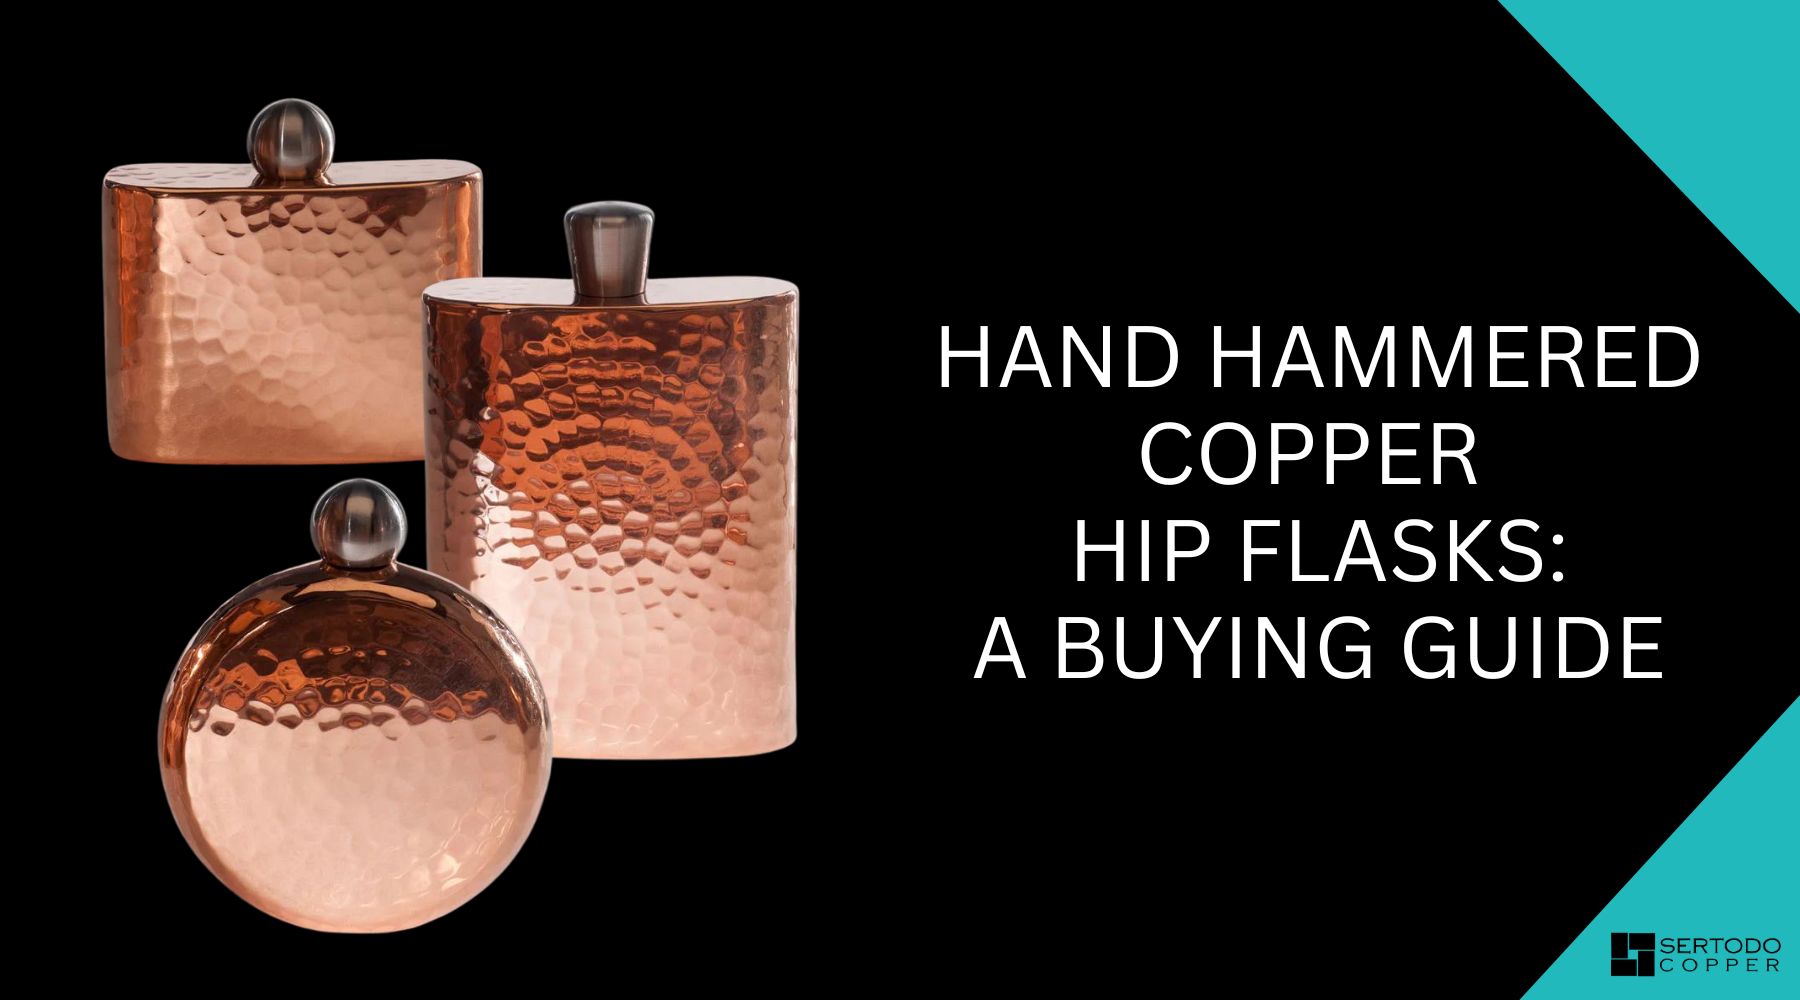 Hand hammered copper hip flasks buying guide